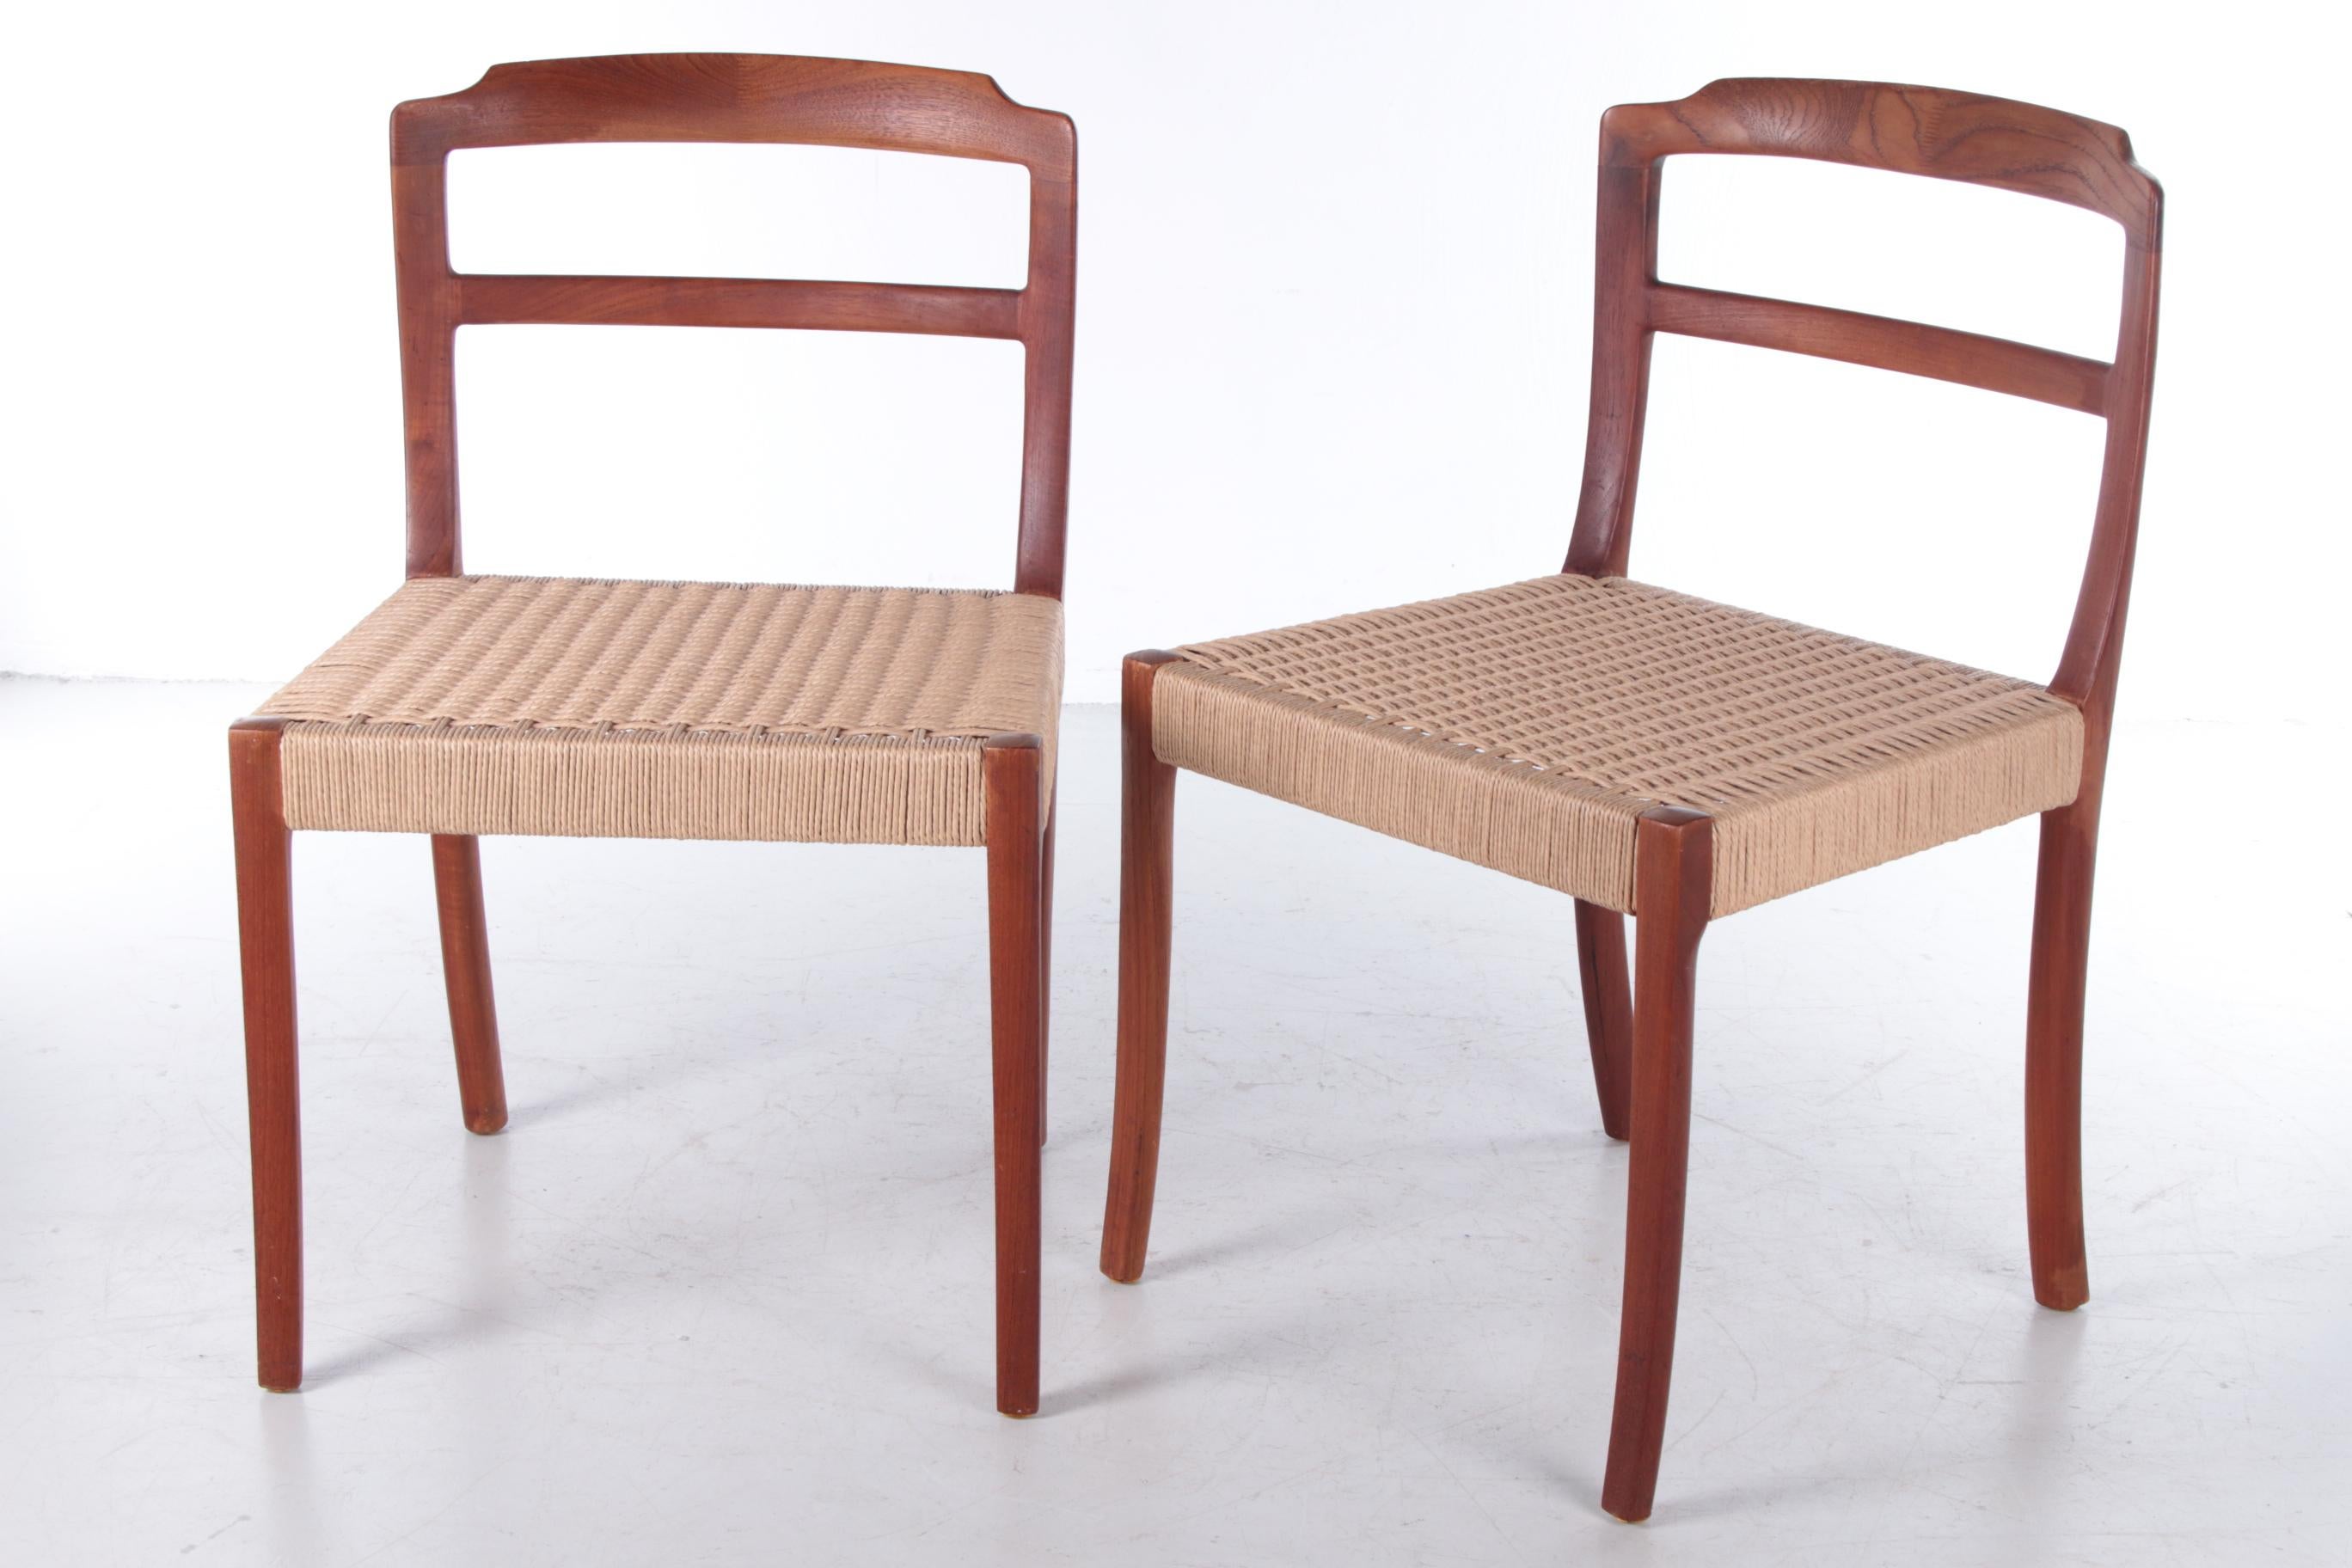 Danish Design Set dining room chairs Design by Ole Wanscher, 1960


Teak dining room chairs by Ole Wanscher, circa 1960's.

Beautifully curved stylish backrests and generous seat provide support and comfort. Distinctive solid wood staggered